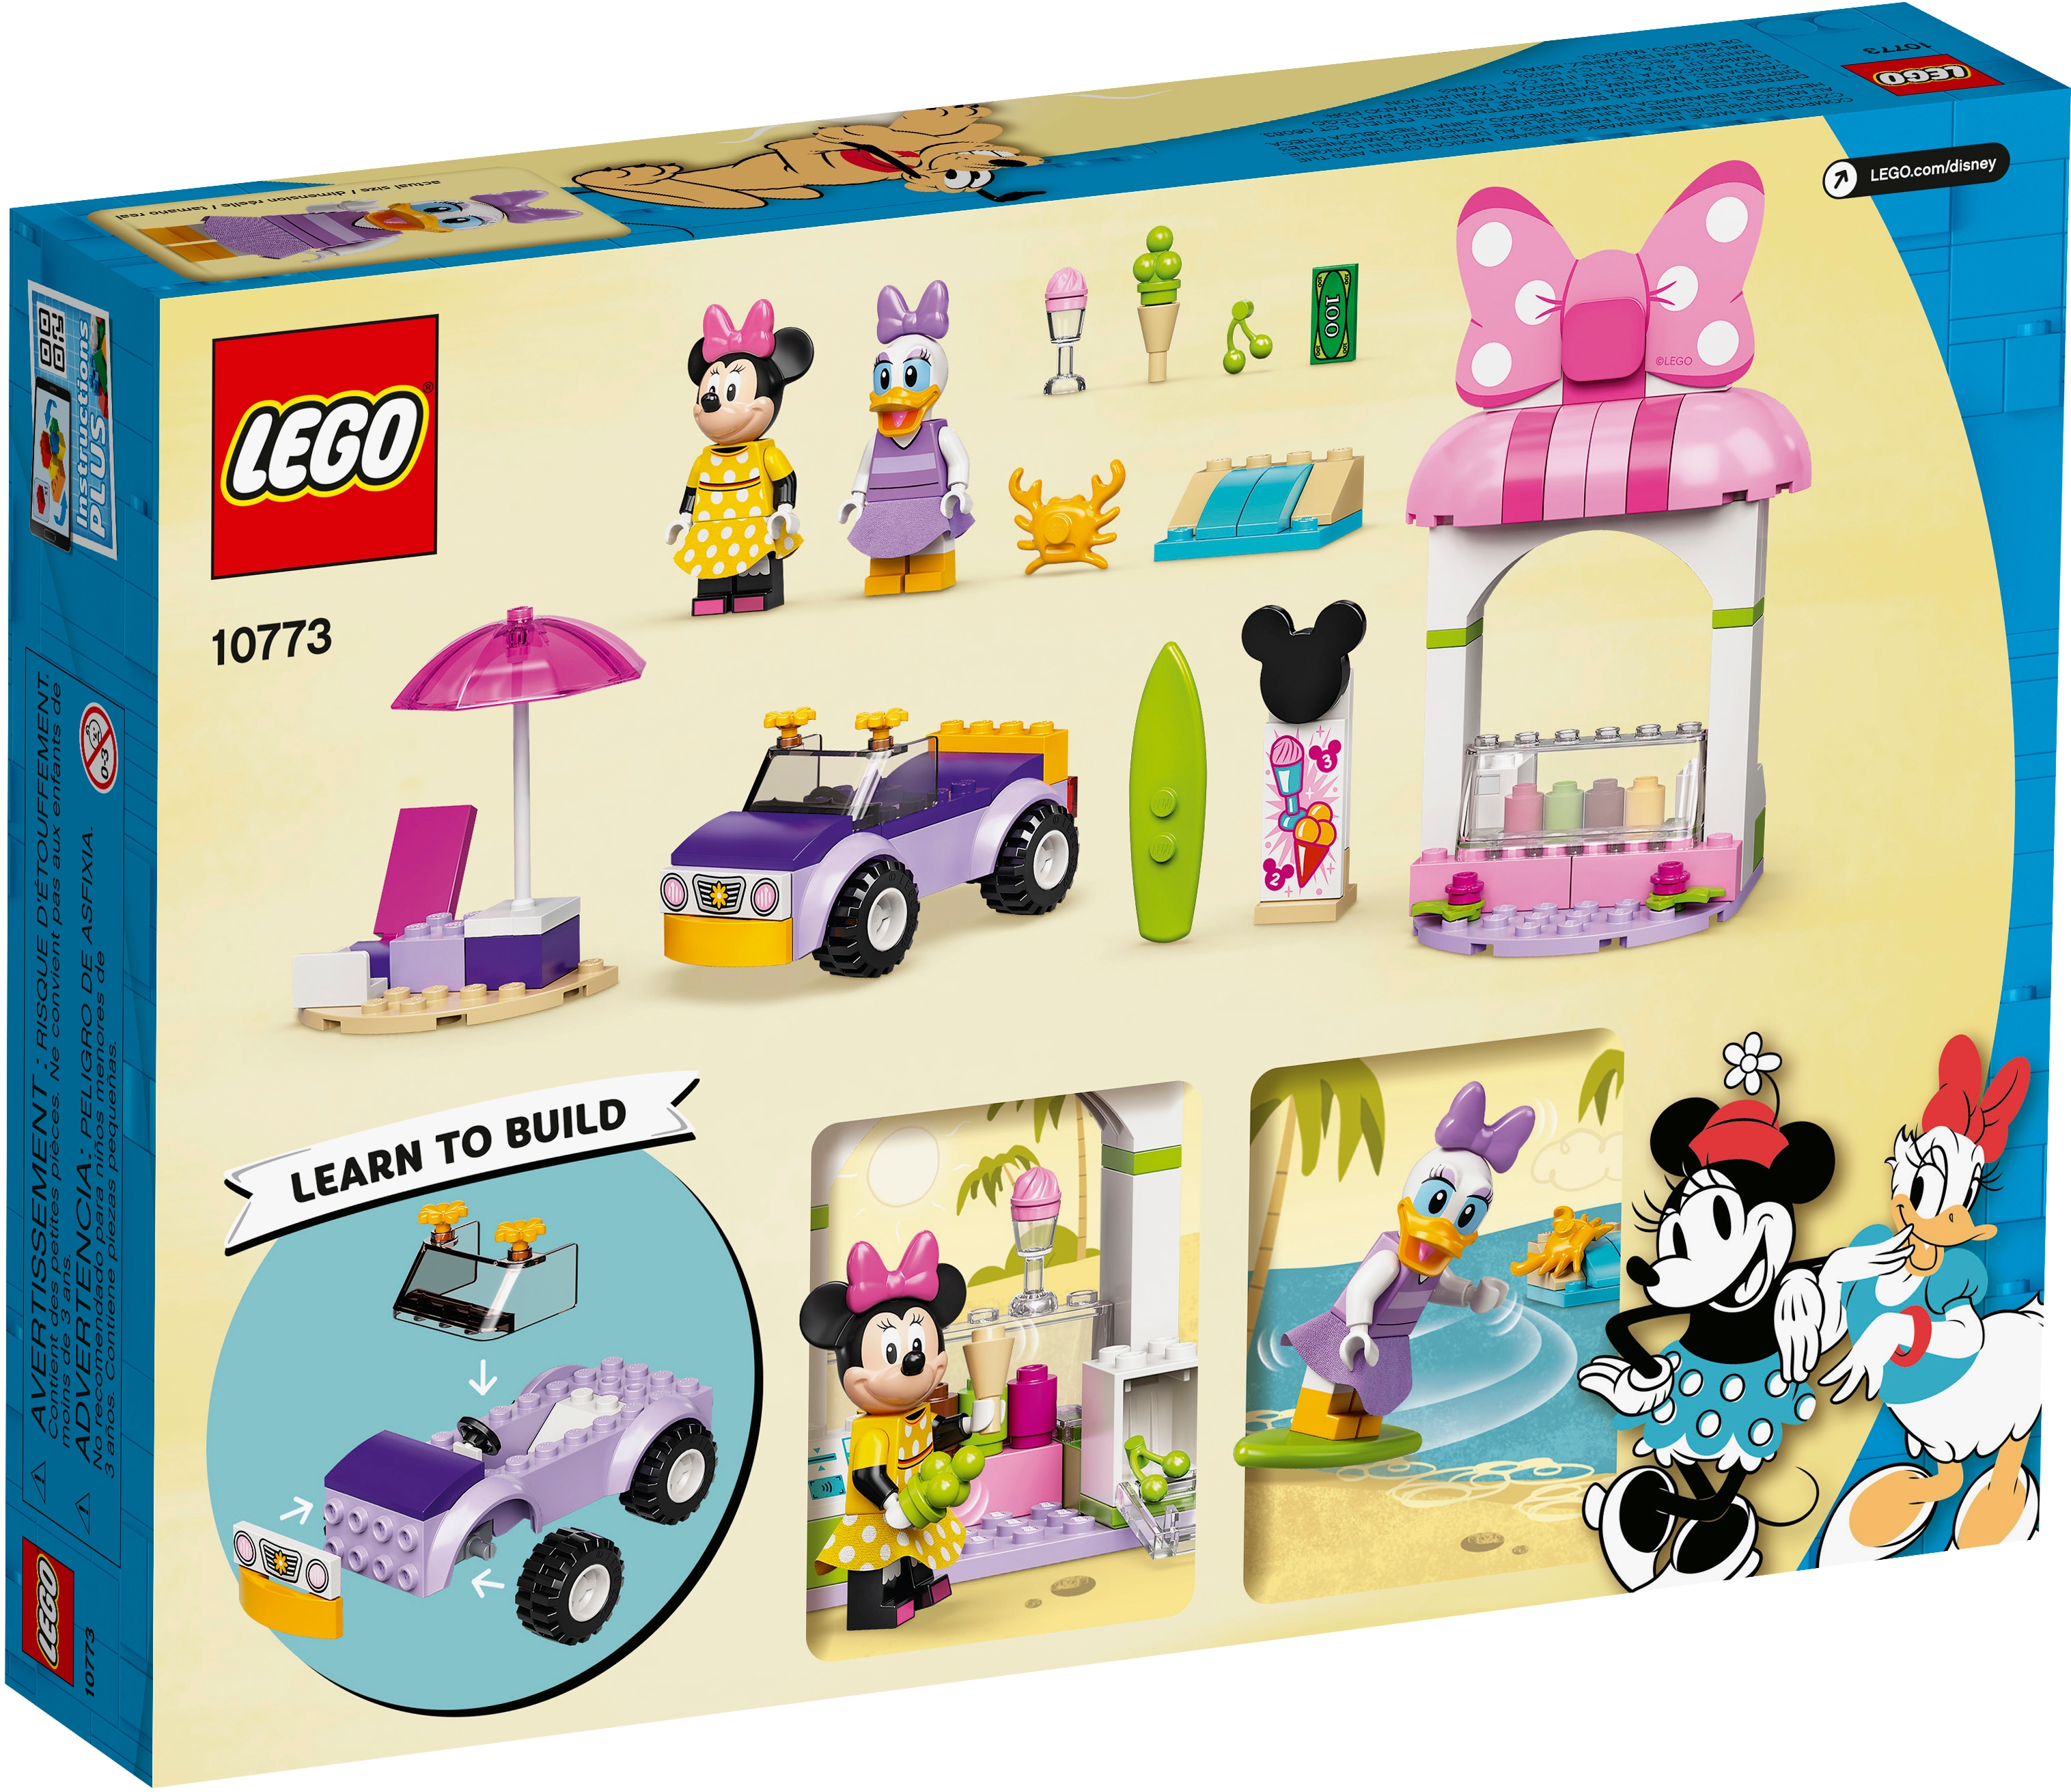 100 Pieces LEGO Disney Mickey and Friends Minnie Mouse’s Ice Cream Shop 10773 Building Kit; Fun Toy That Makes The Best Gift; New 2021 